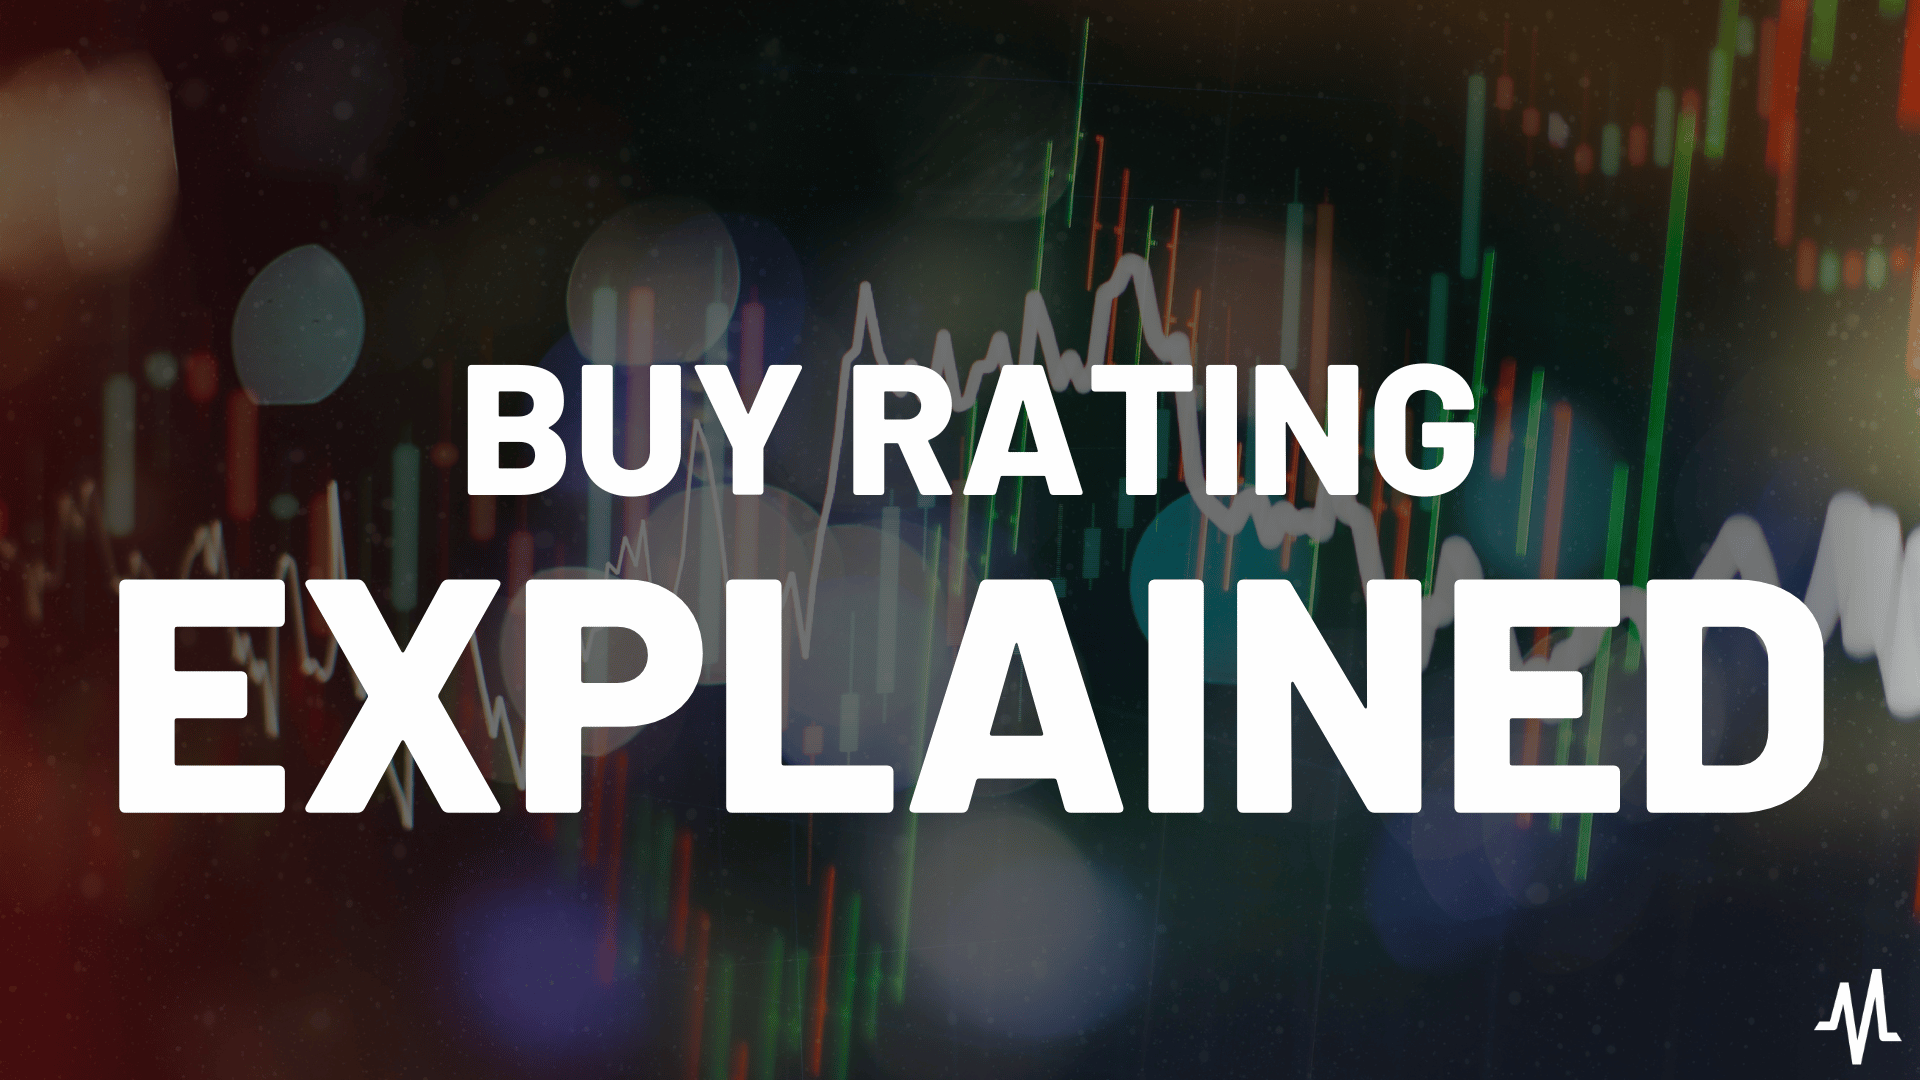 What Does a 'Buy' Rating Mean for Investors?